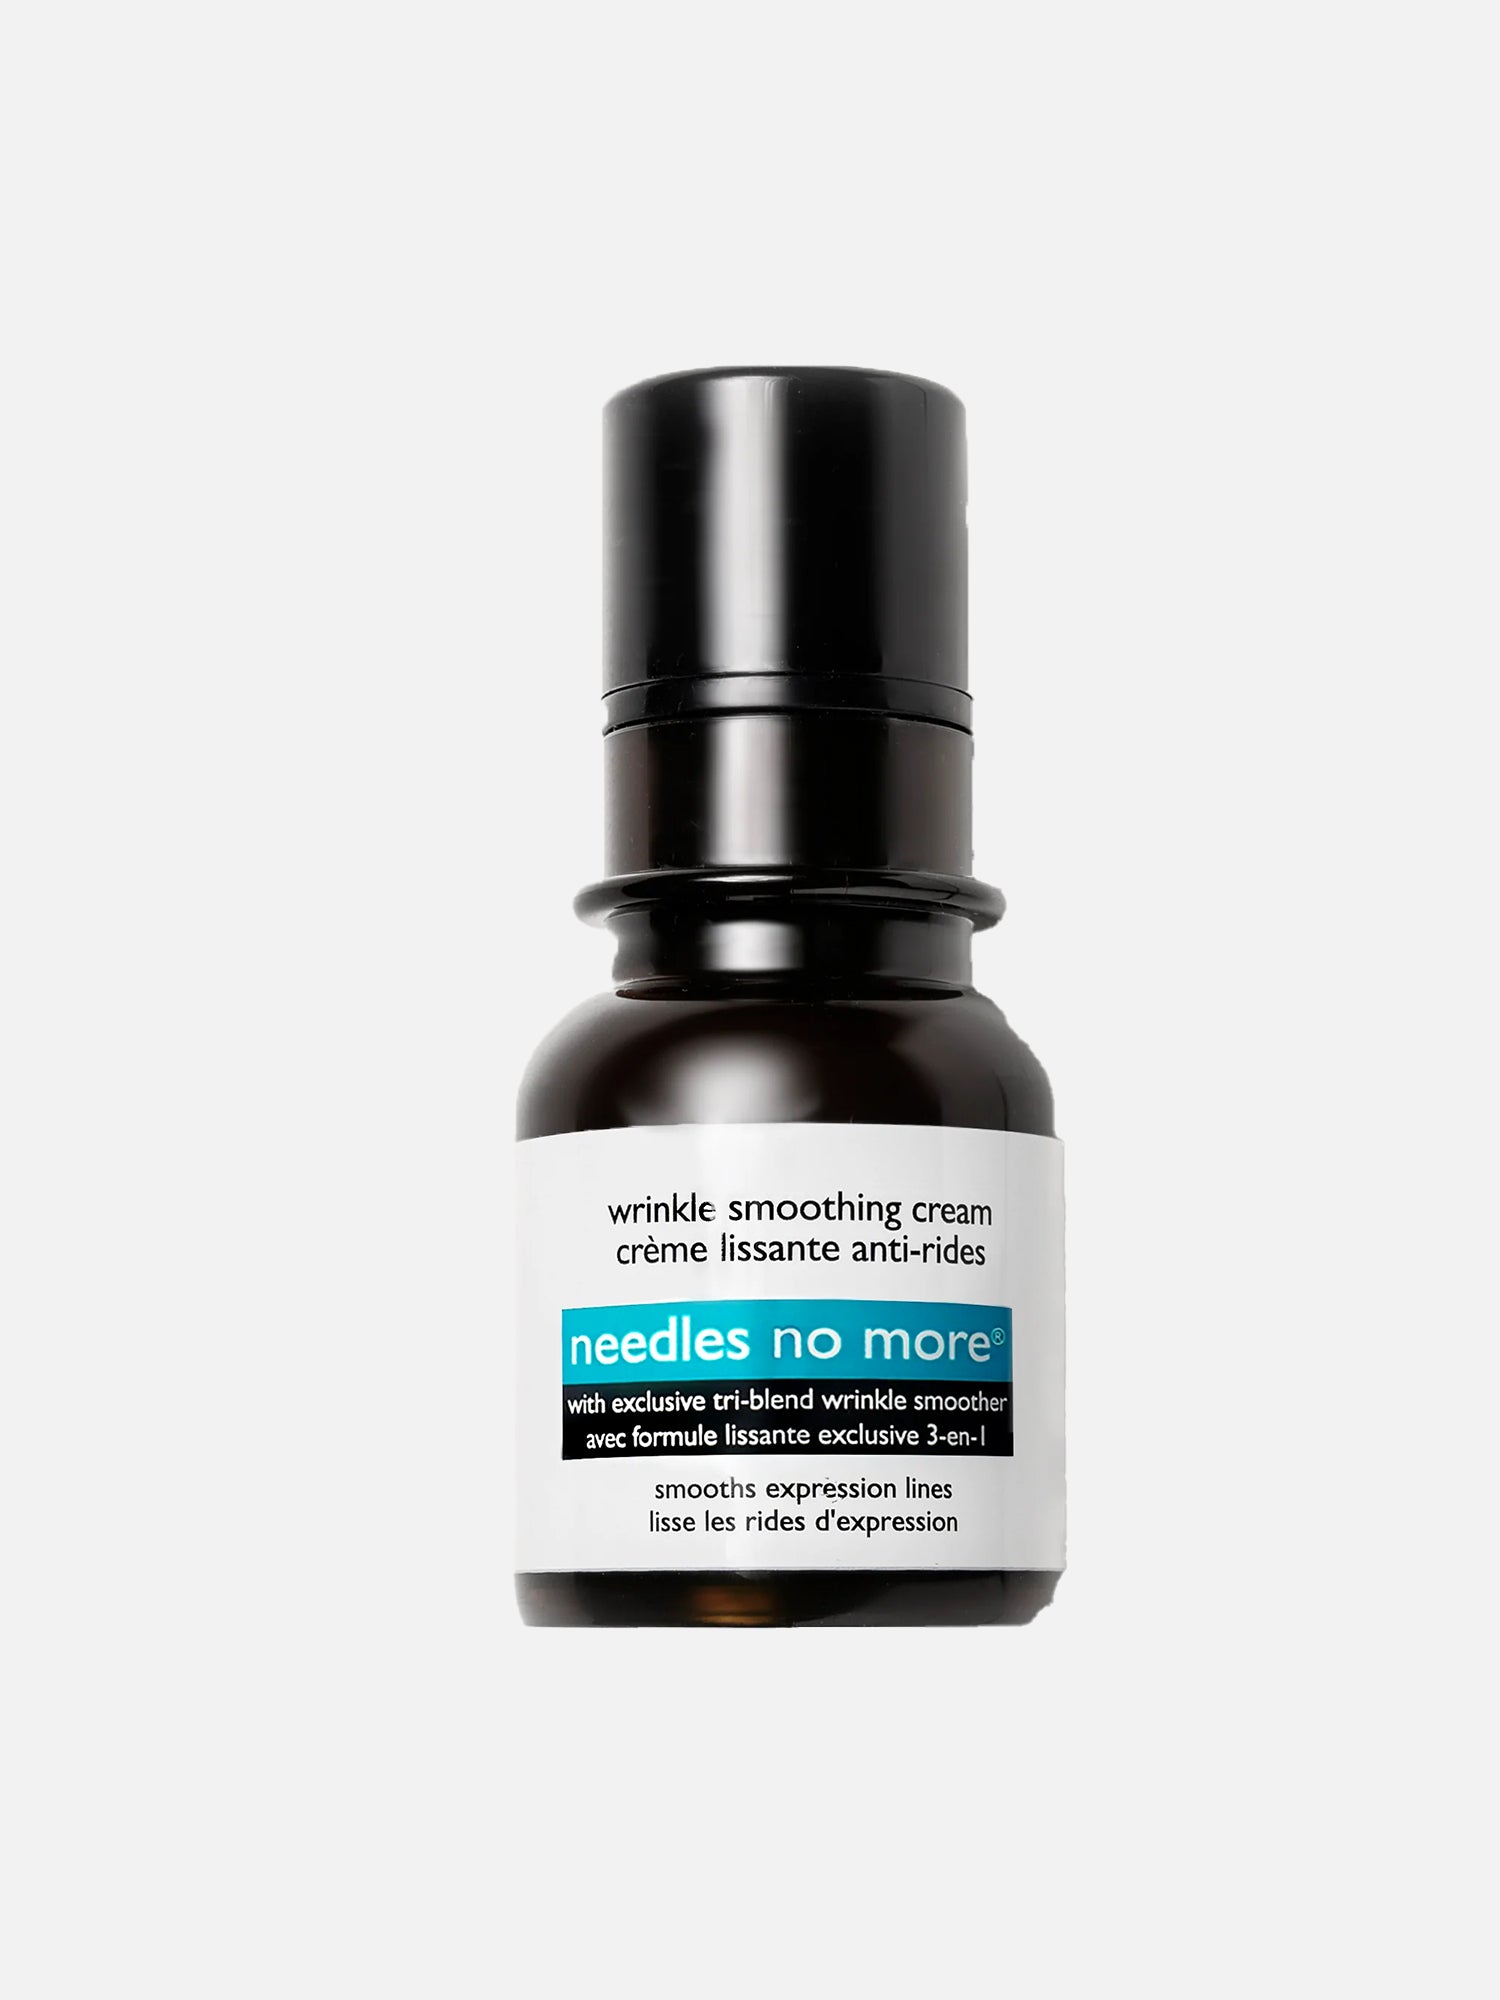 Dr. Brandt- Needles No More™ Wrinkle Smoothing Cream